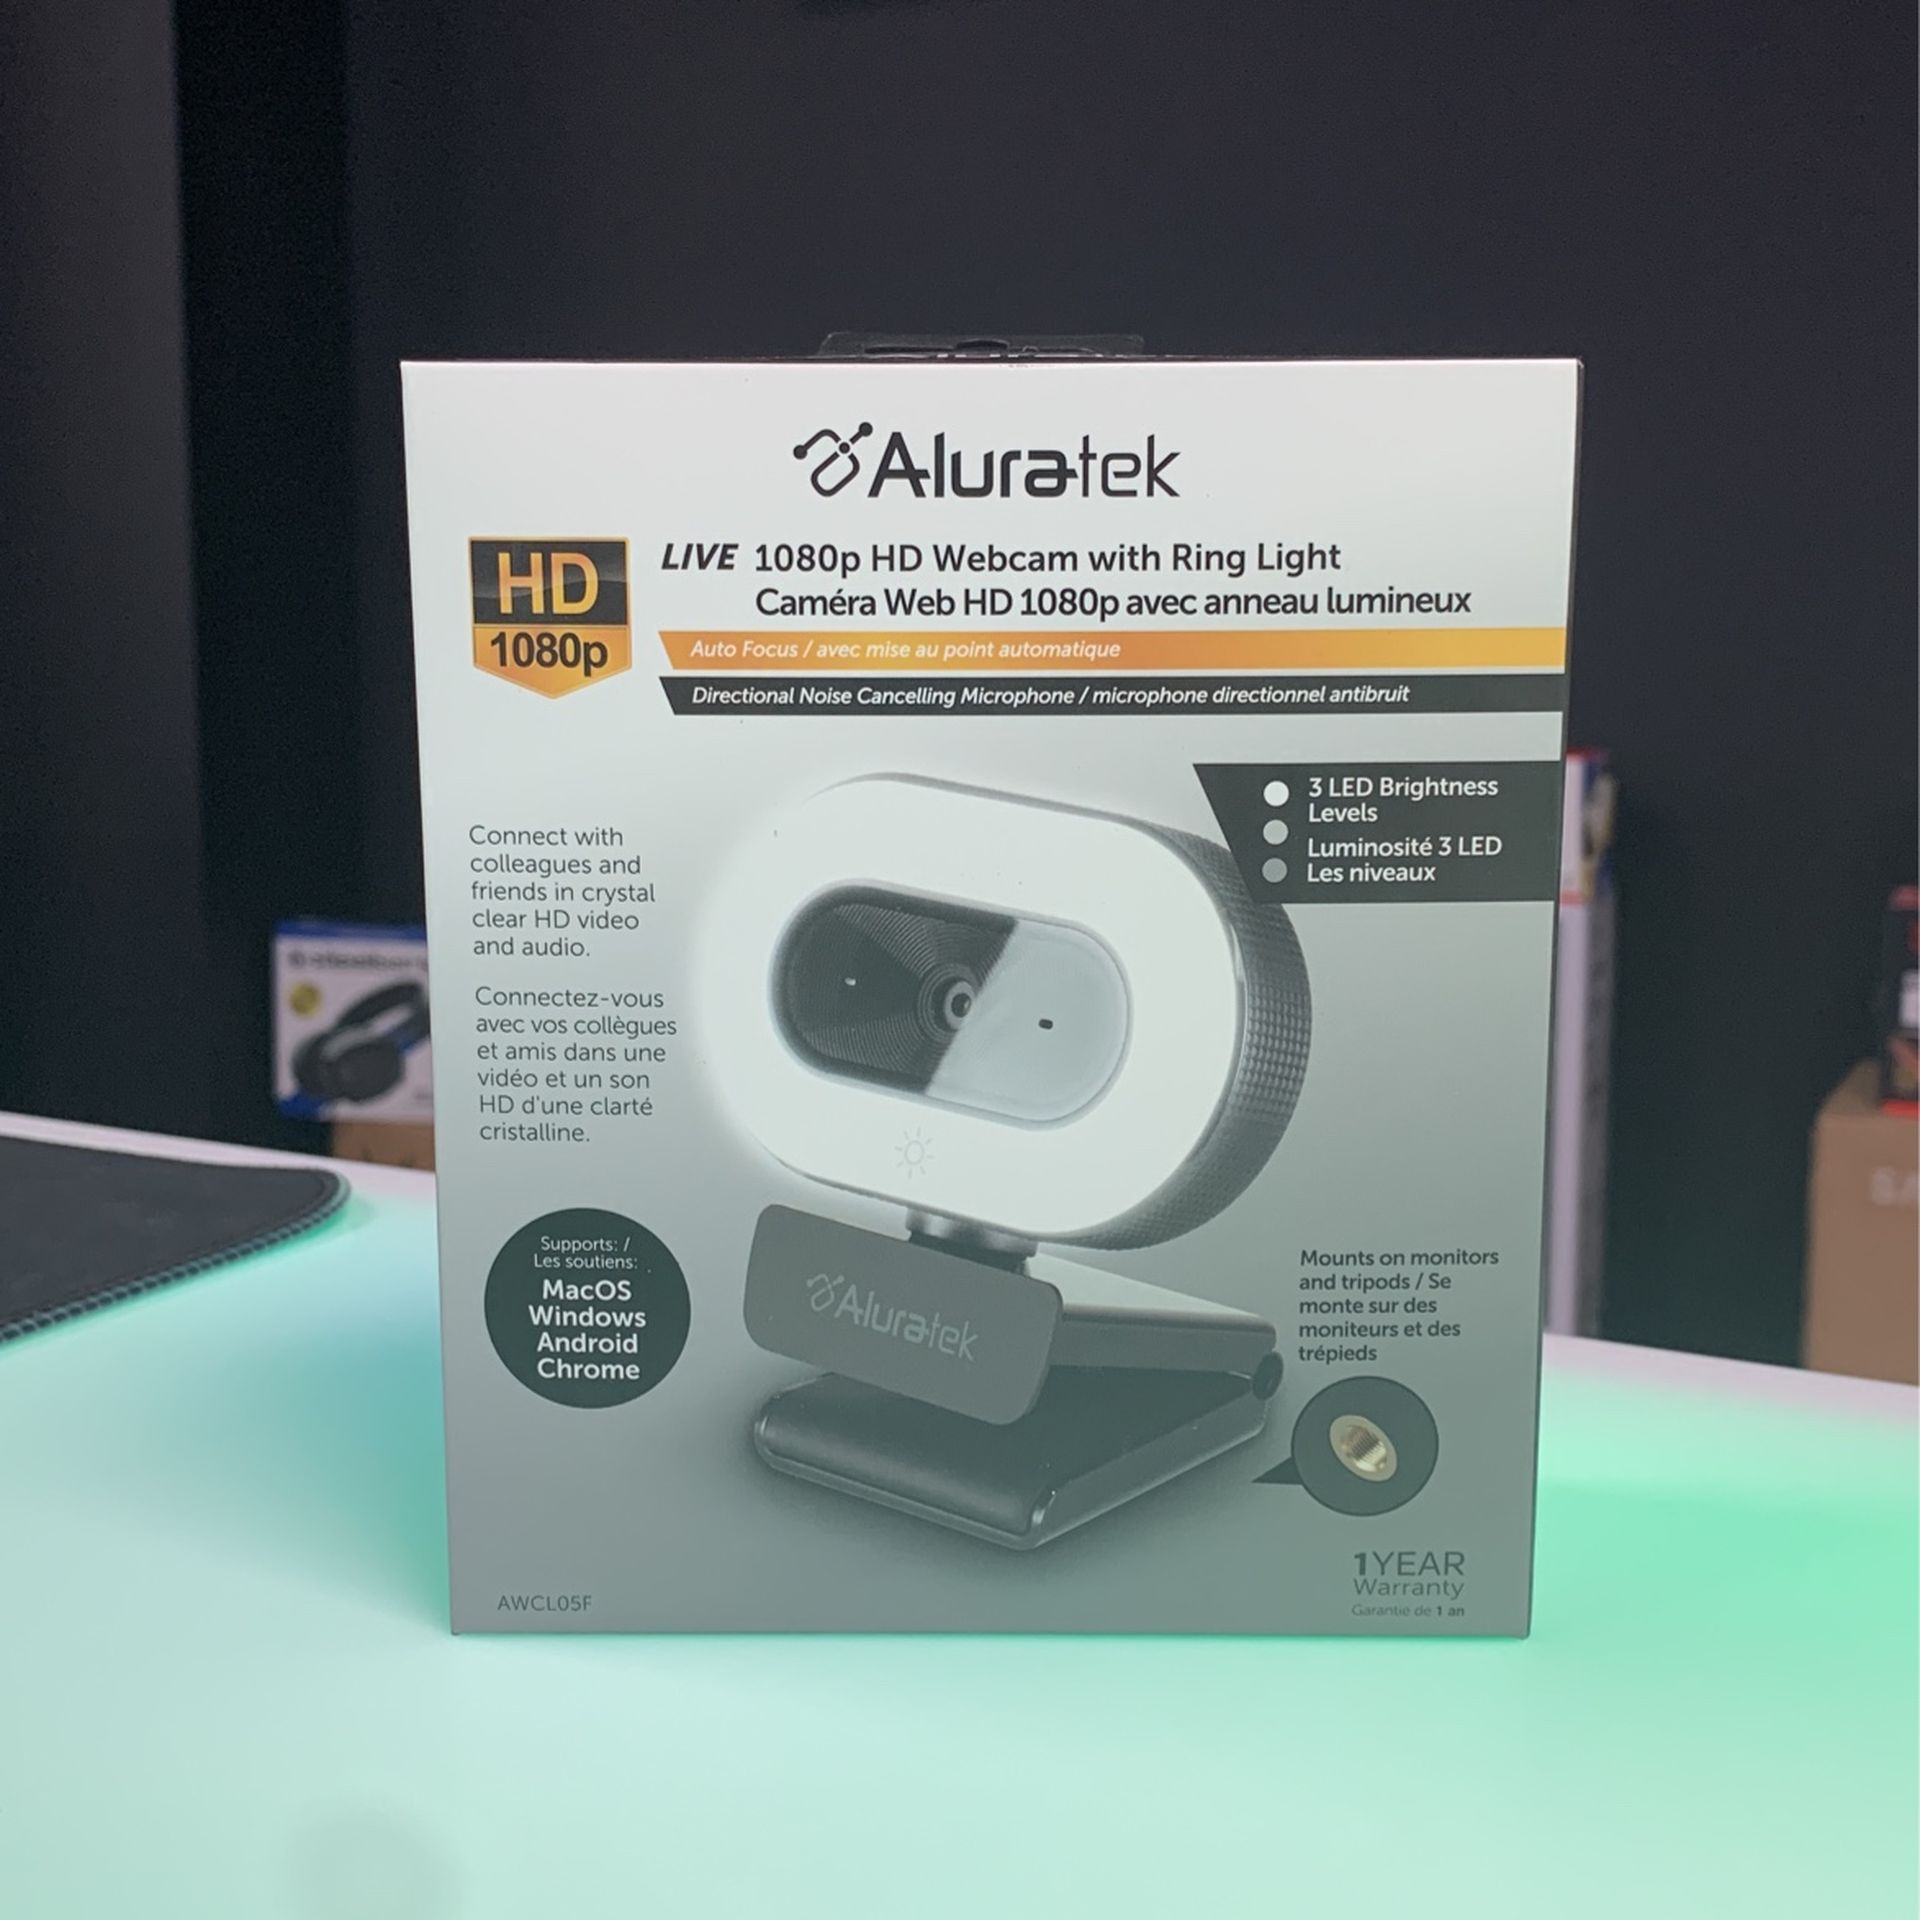 ALURATEK 1080p HD Webcam With Ring Light - New